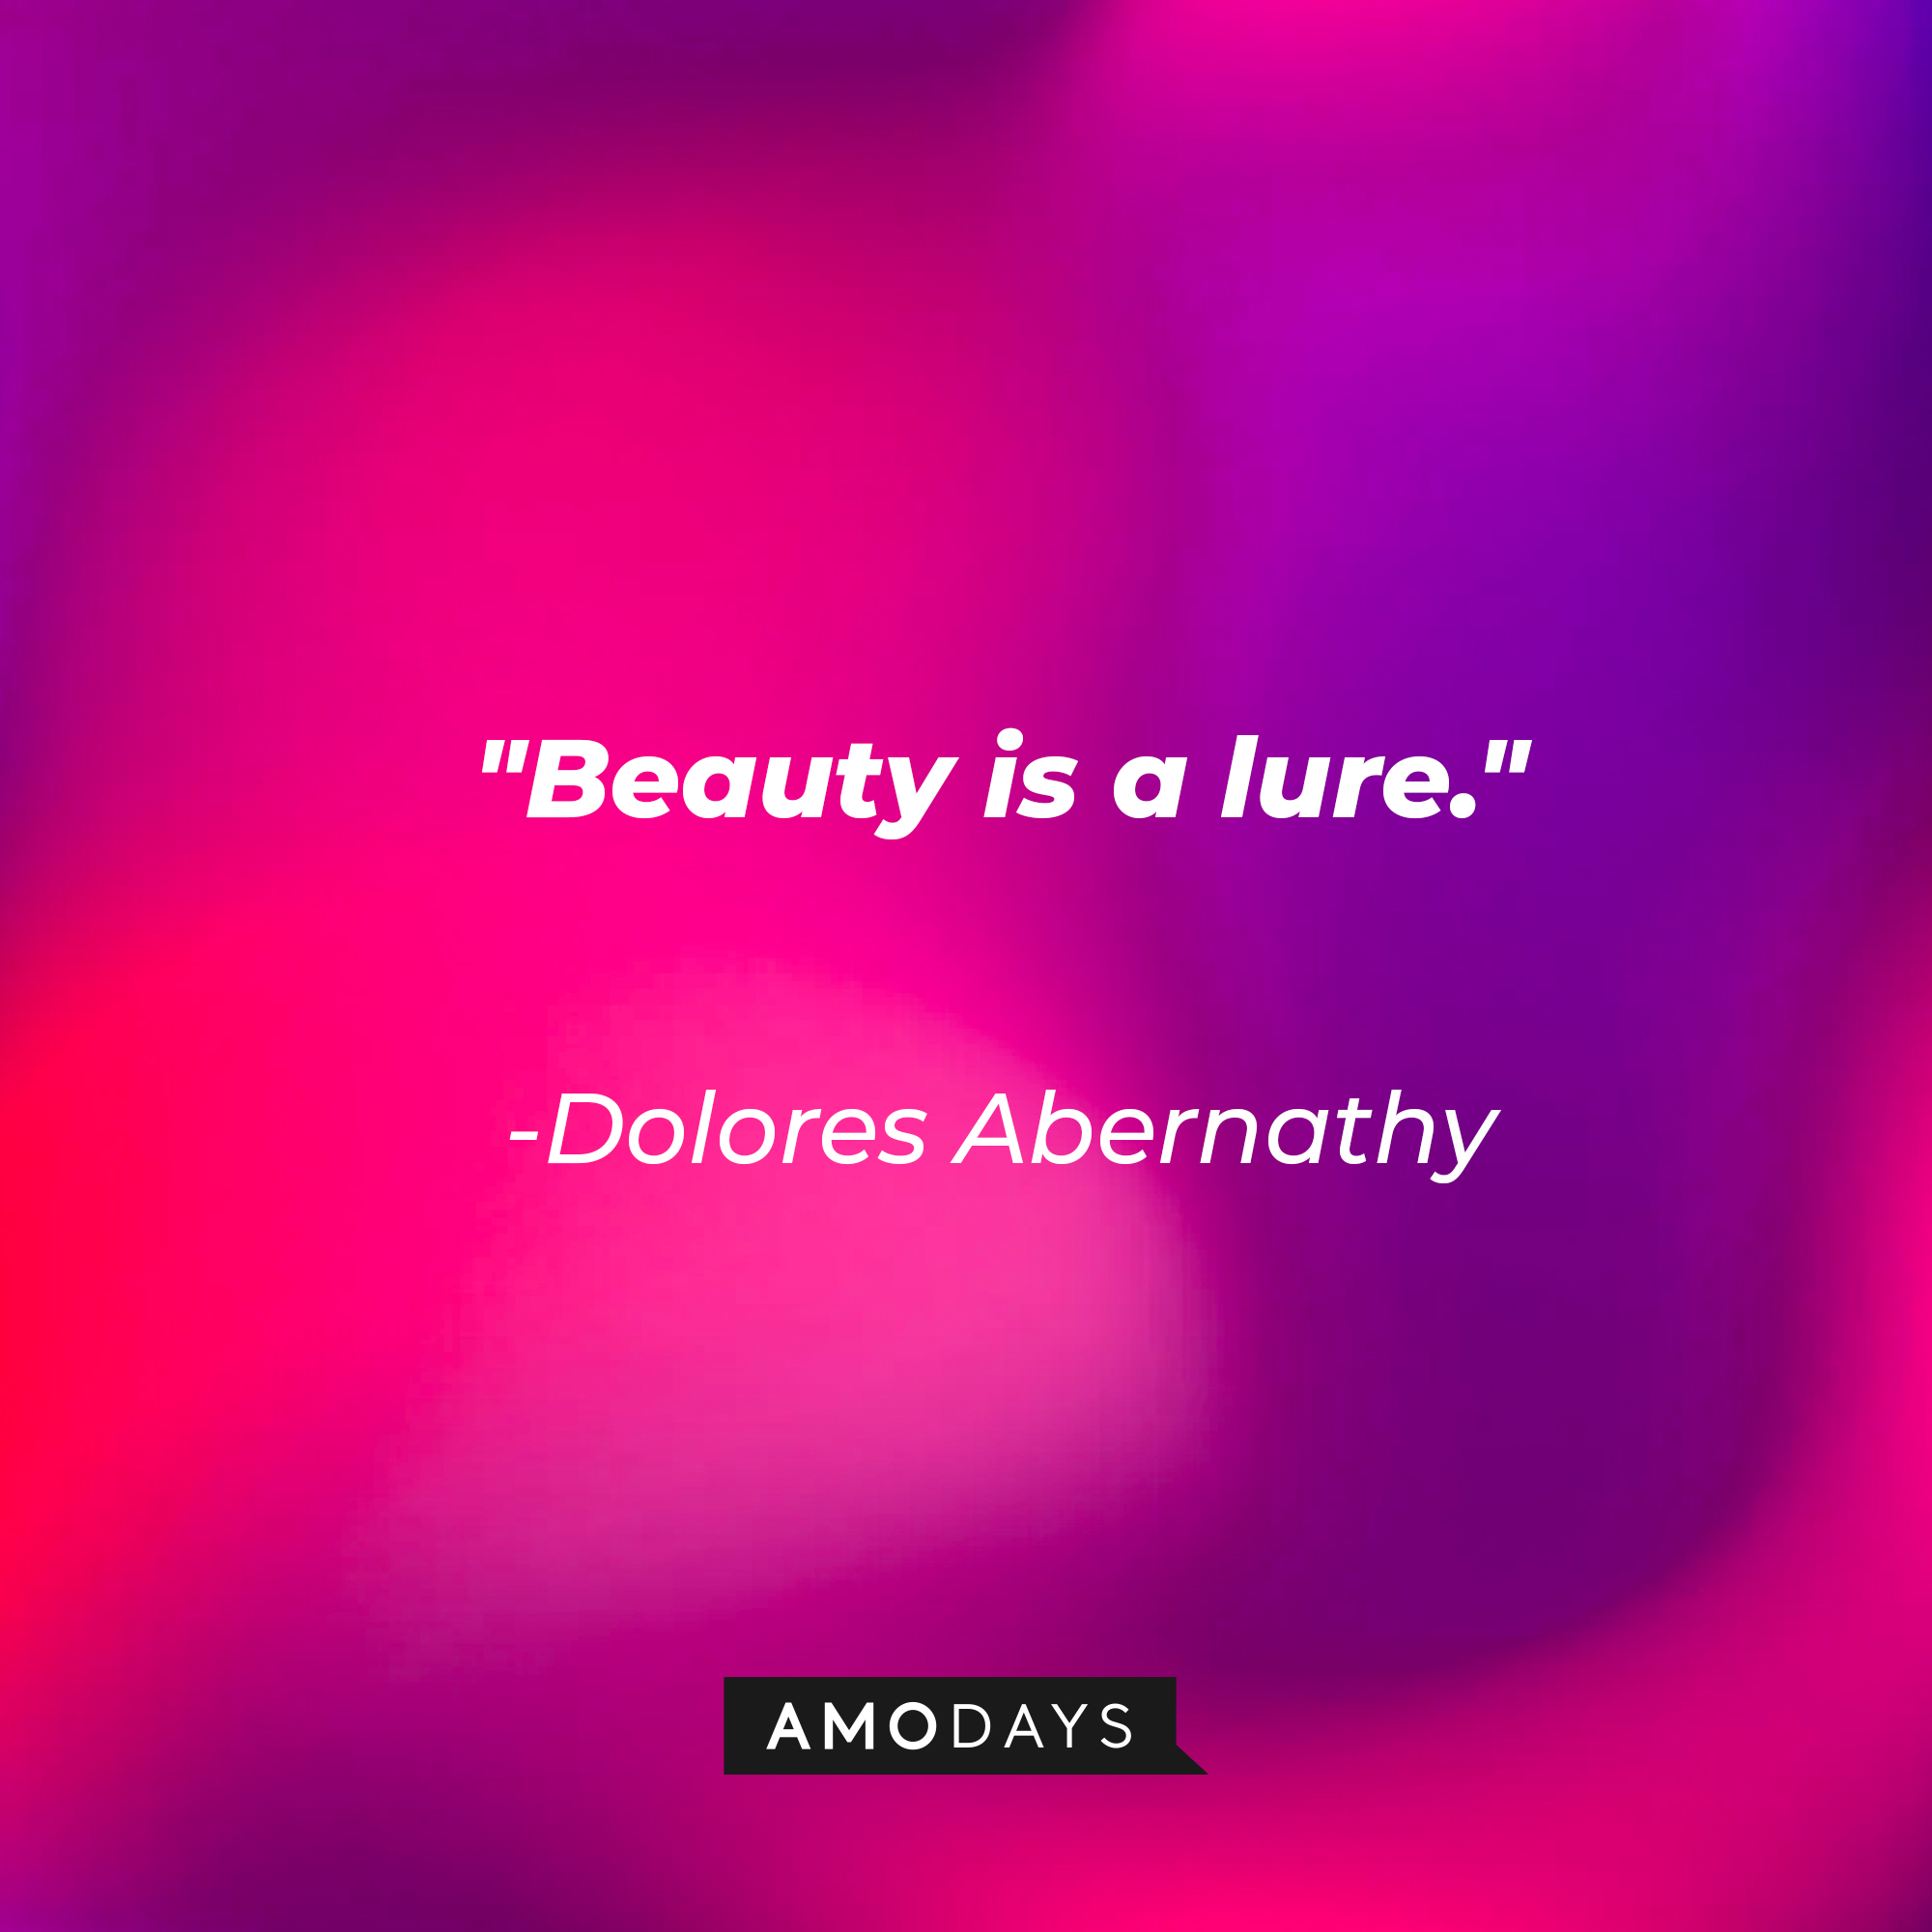 Dolores Abernathy's quote: "Beauty is a lure." | Source: AmoDays